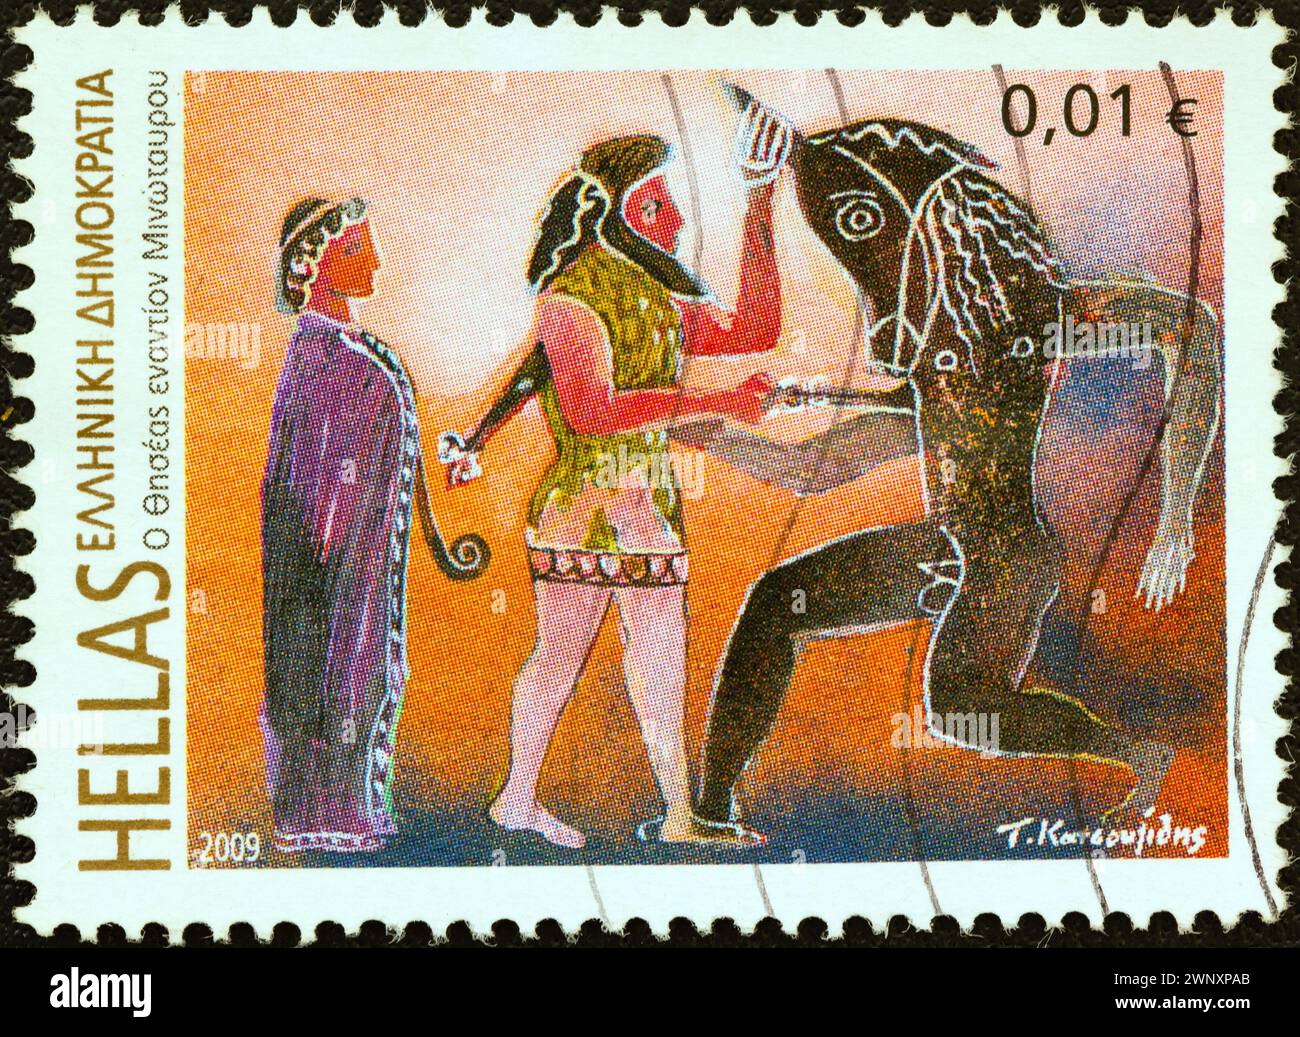 GREECE - CIRCA 2009: A stamp printed in Greece from the 'Folklore & Mythology' issue shows Theseus against the Minotaur. Stock Photo